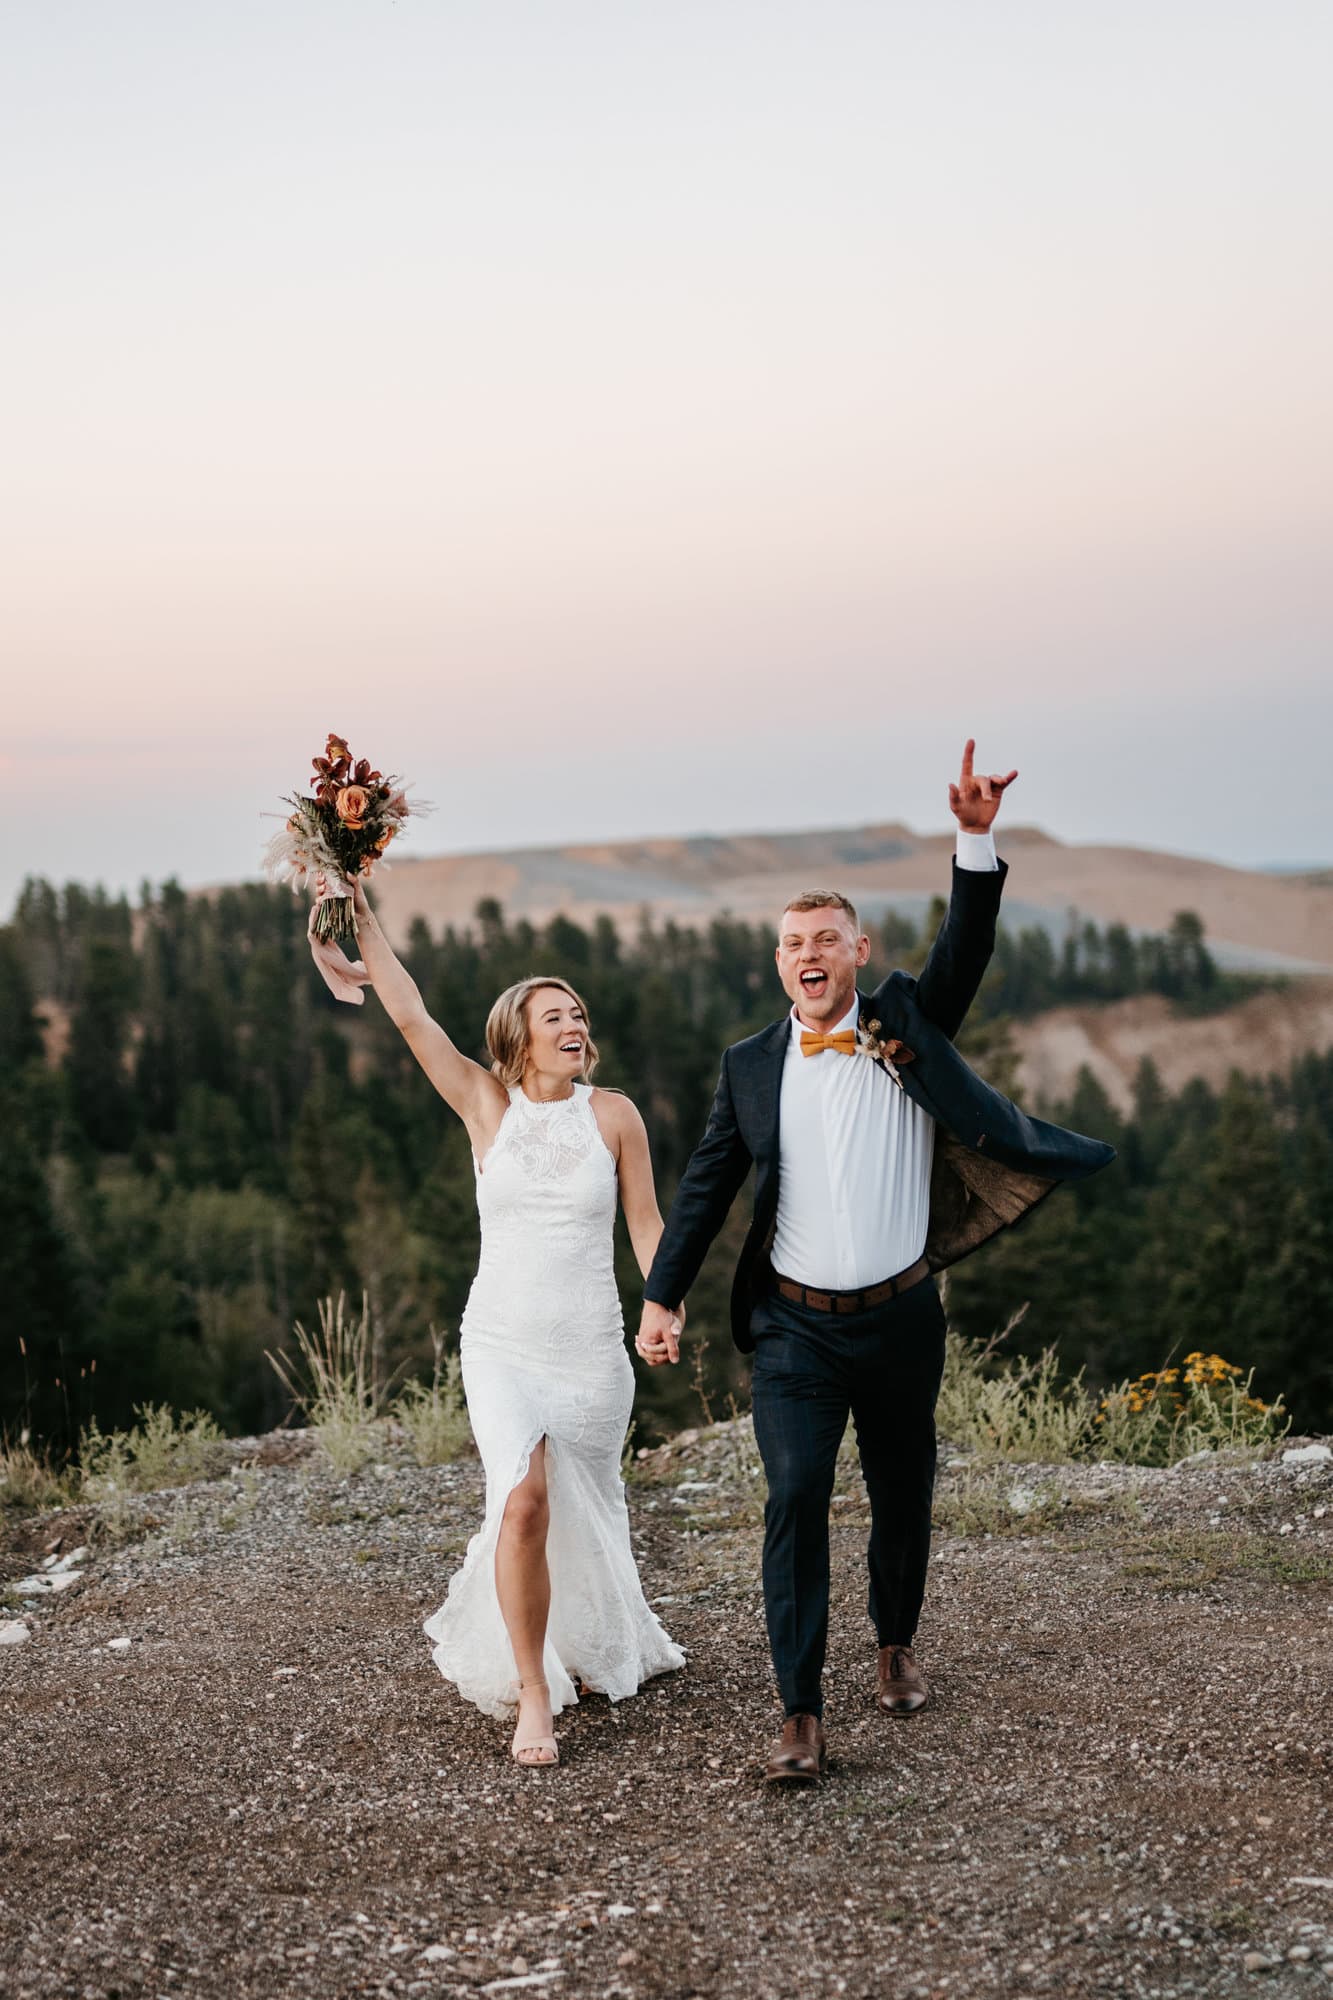 Black Hills Mountain Wedding Photography at Terry Peak Chalet sunset portraits with the bride and groom